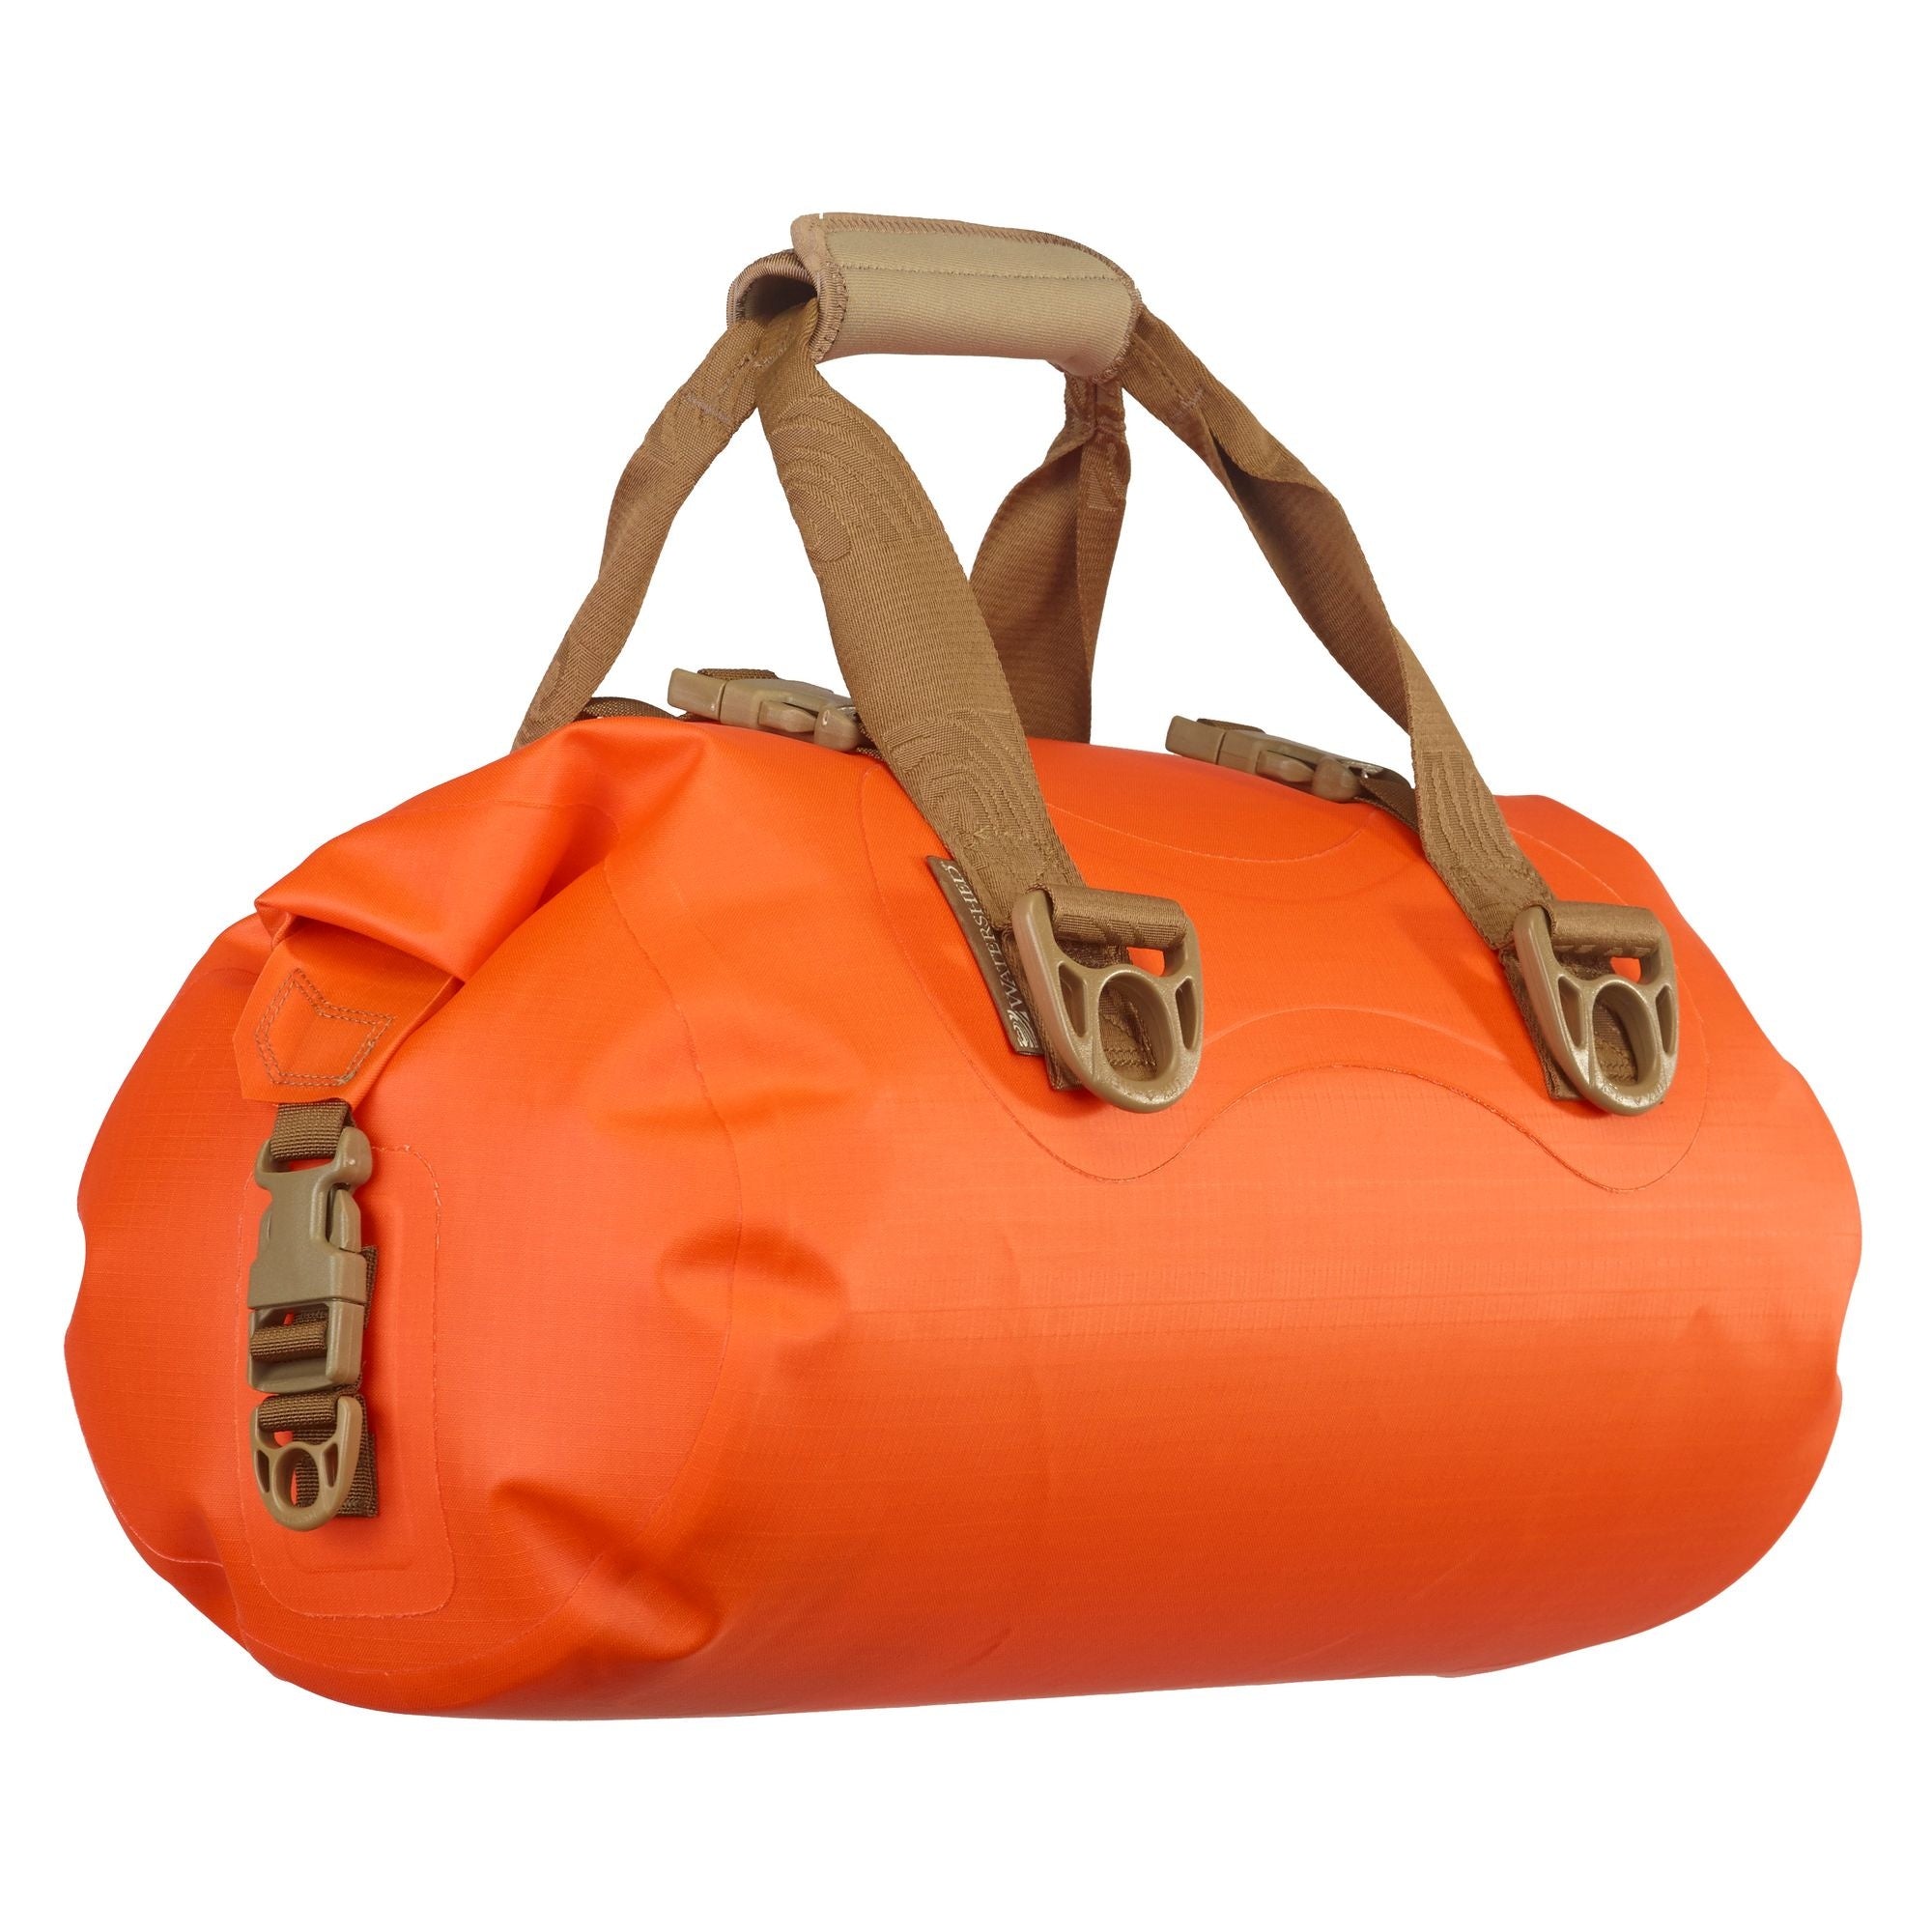 Watershed - Chattooga Dry Duffle